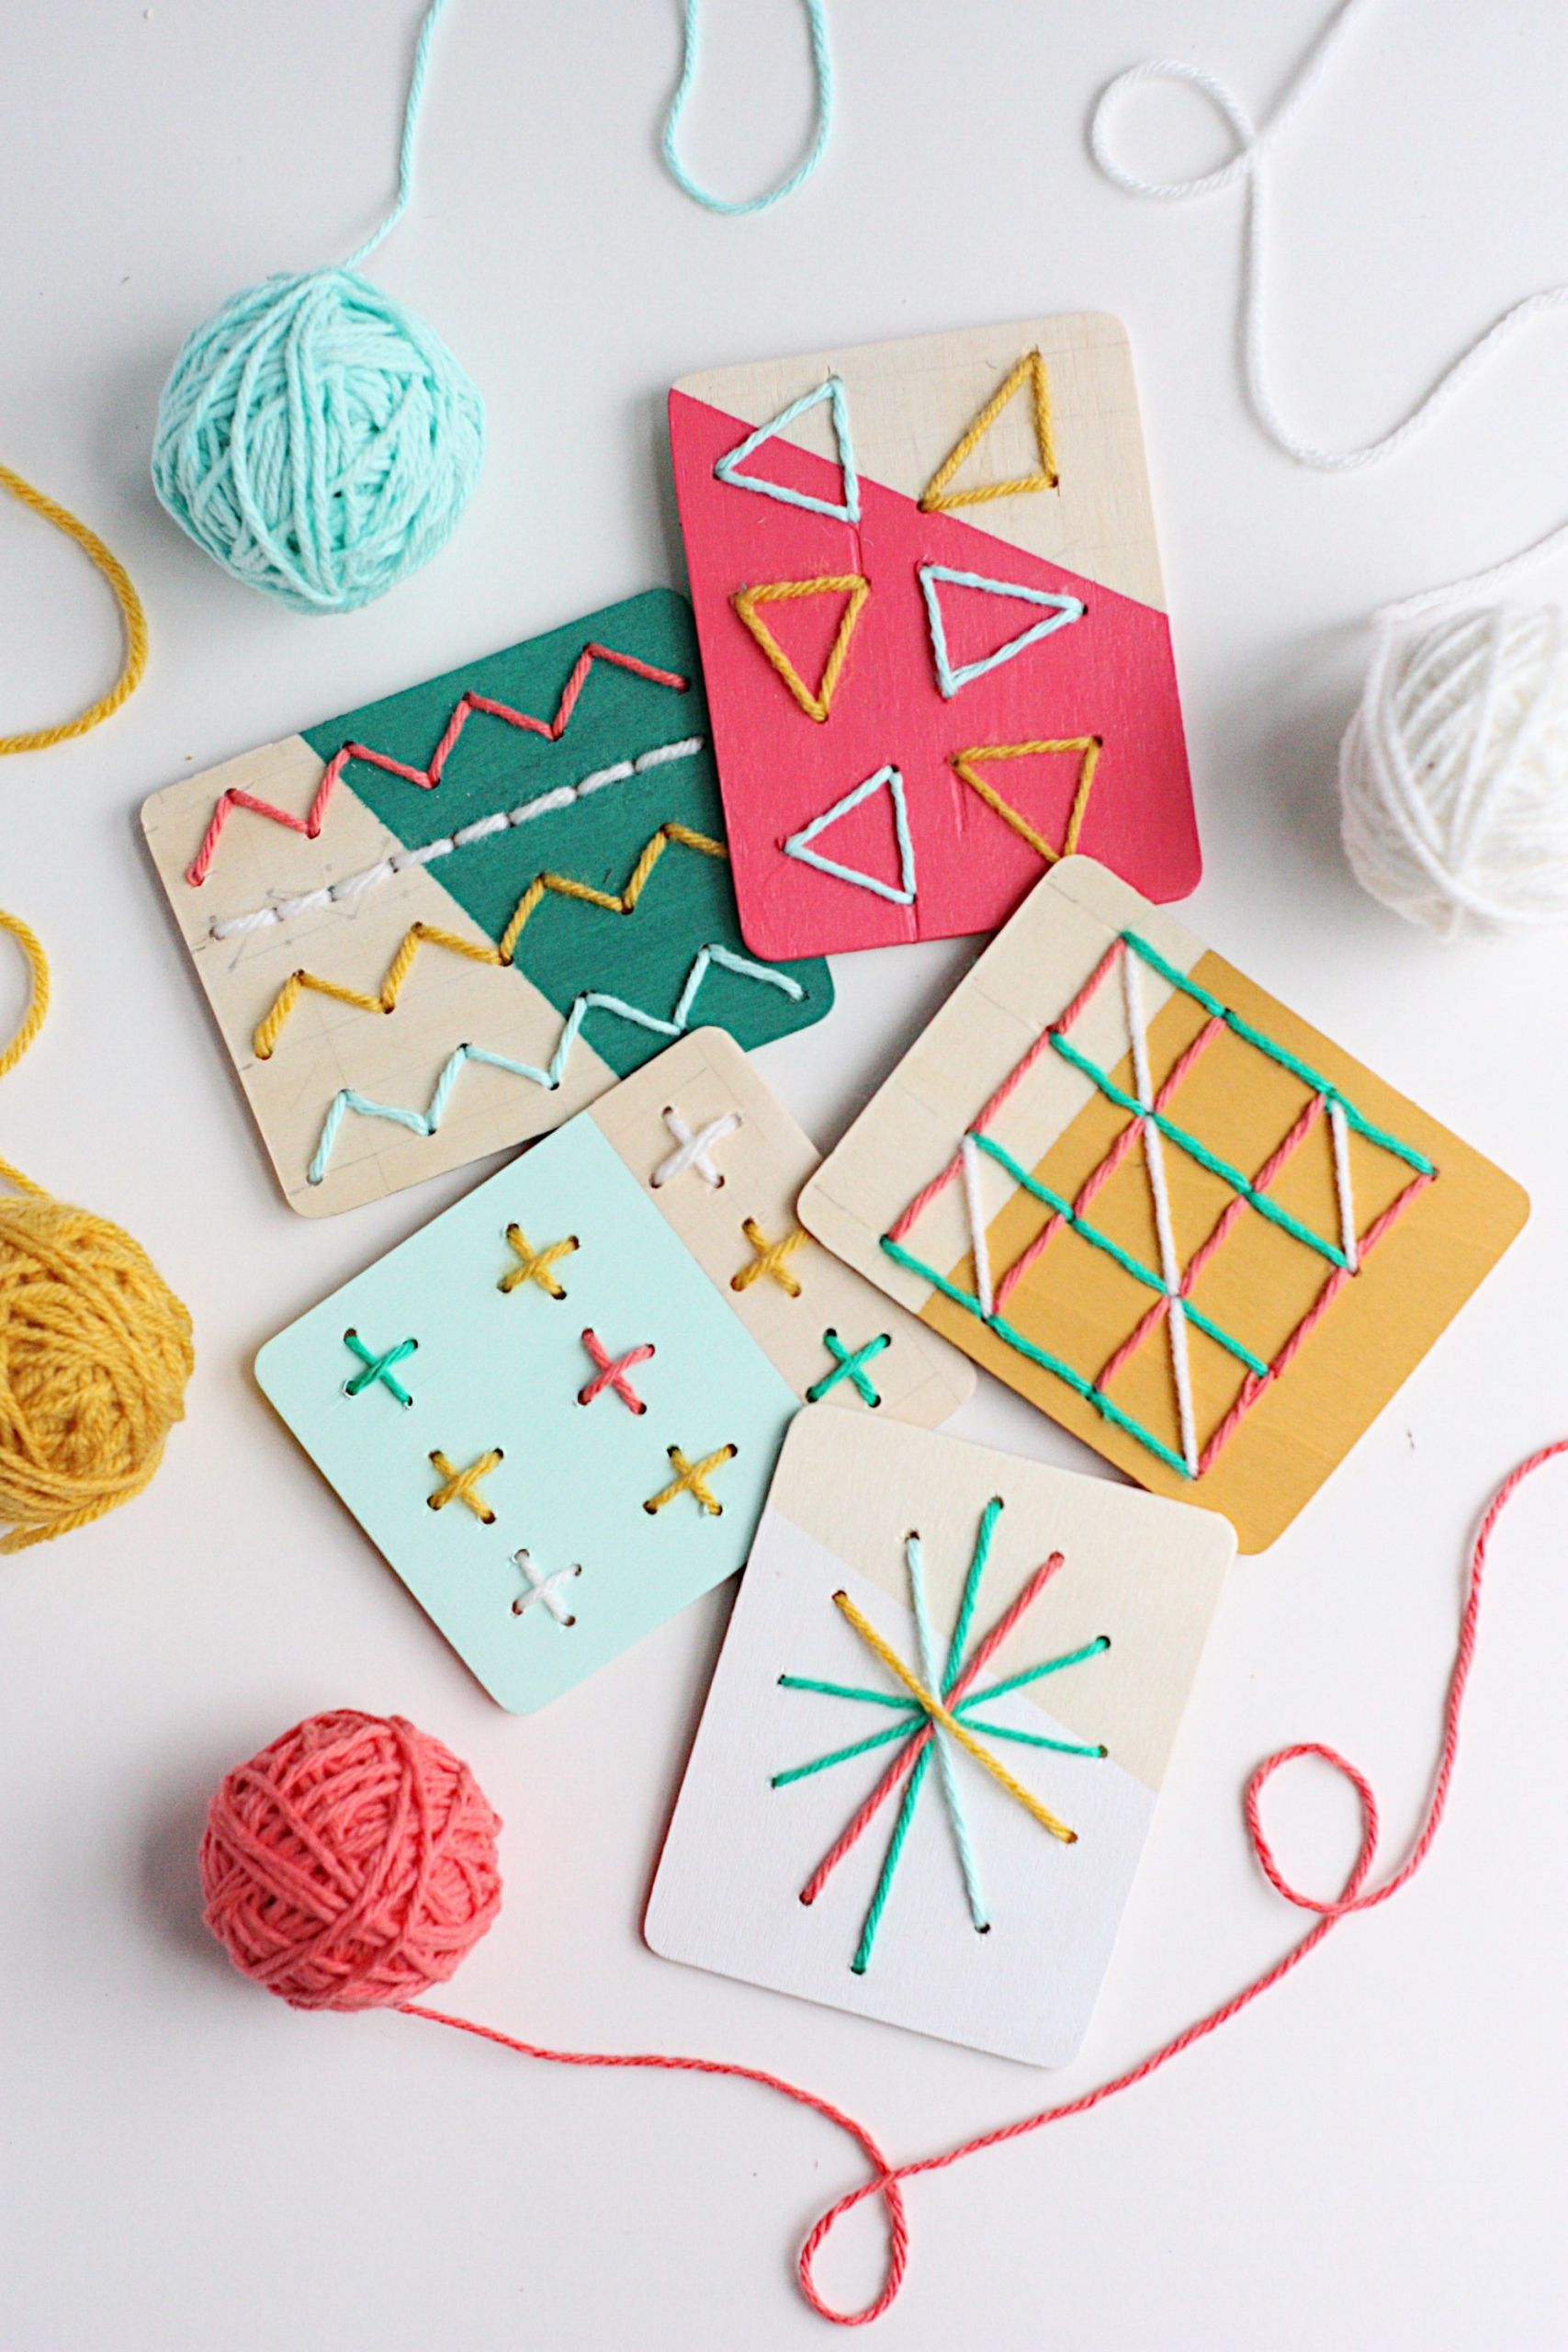 Fun DIY Projects For Kids
 11 DIY Yarn Crafts That Will Amaze Your Kids Shelterness